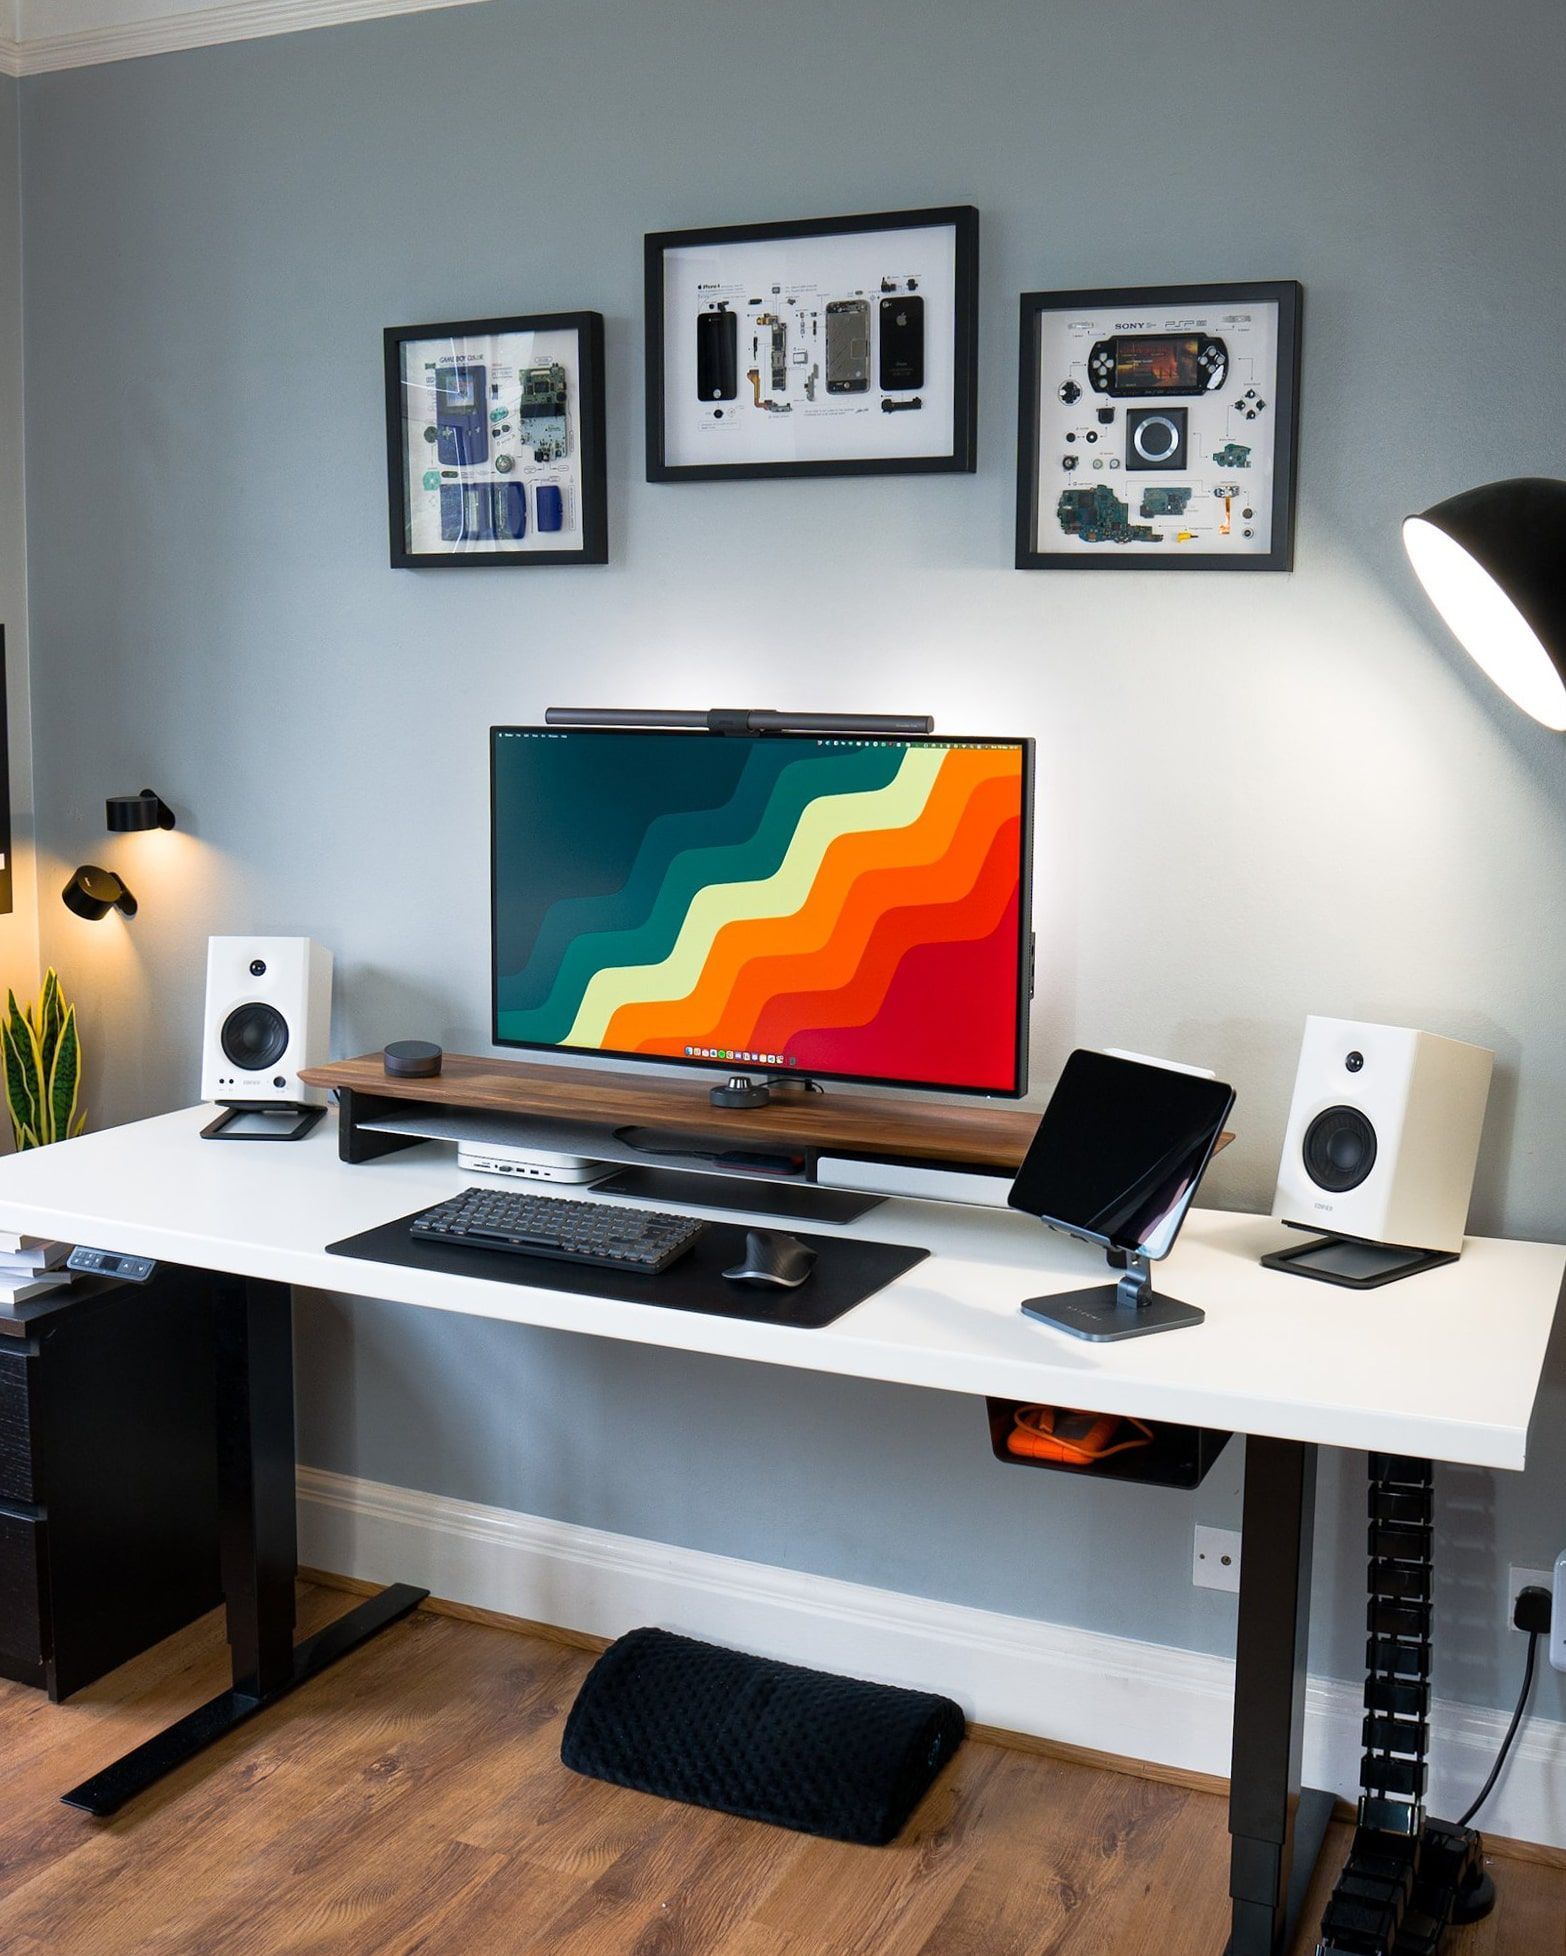 A home office desk setup with a white desk, colourful widescreen monitor, high-fidelity speakers, and a tablet stand, against a backdrop of grey walls with framed technical art